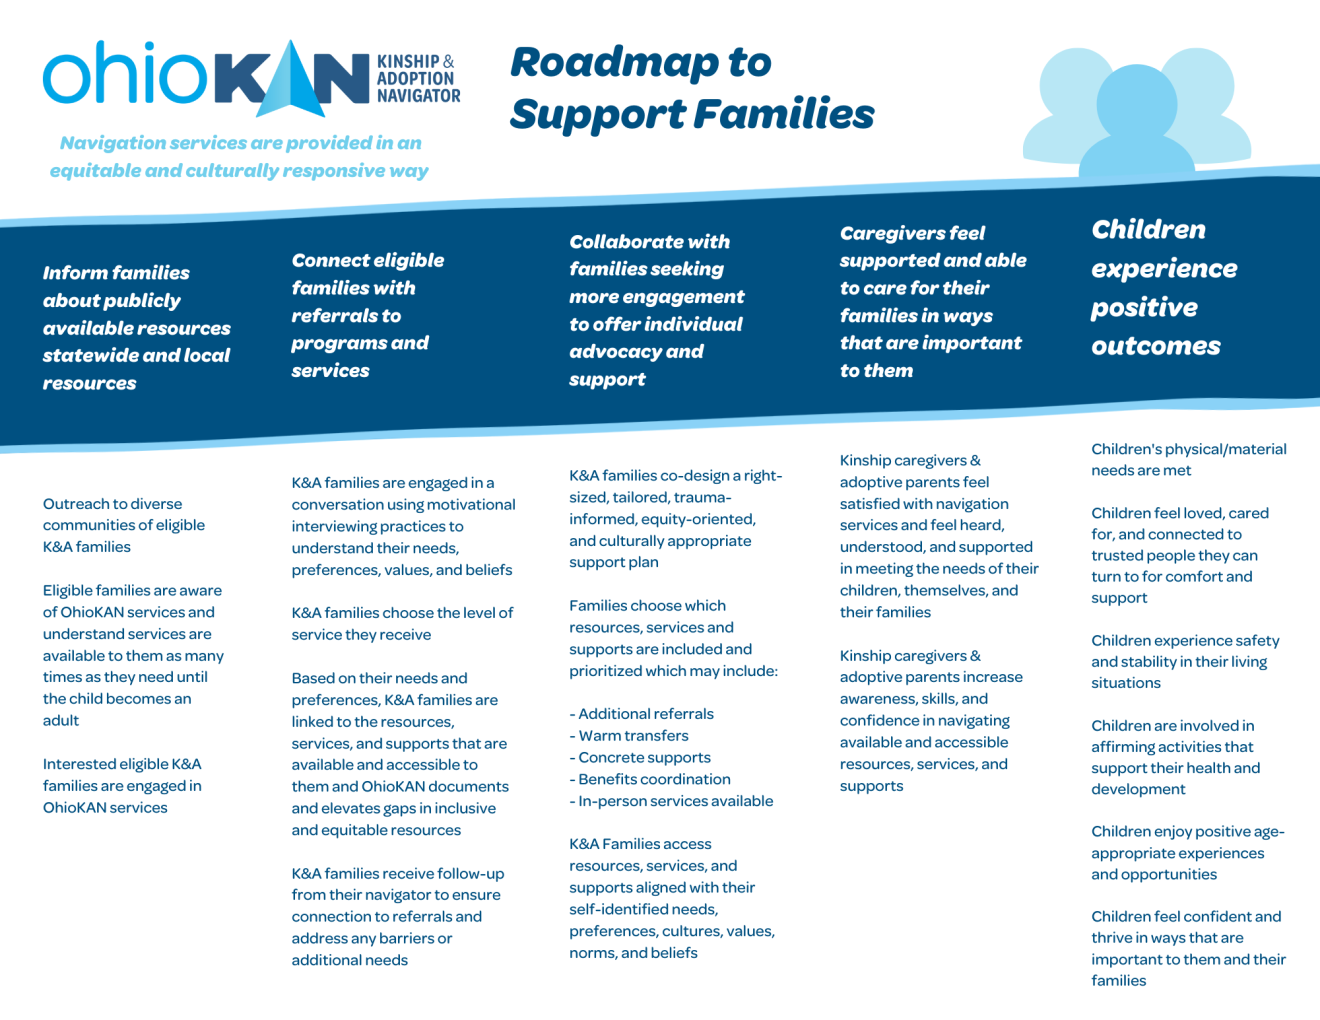 Theory of Change Roadmap to Support Families